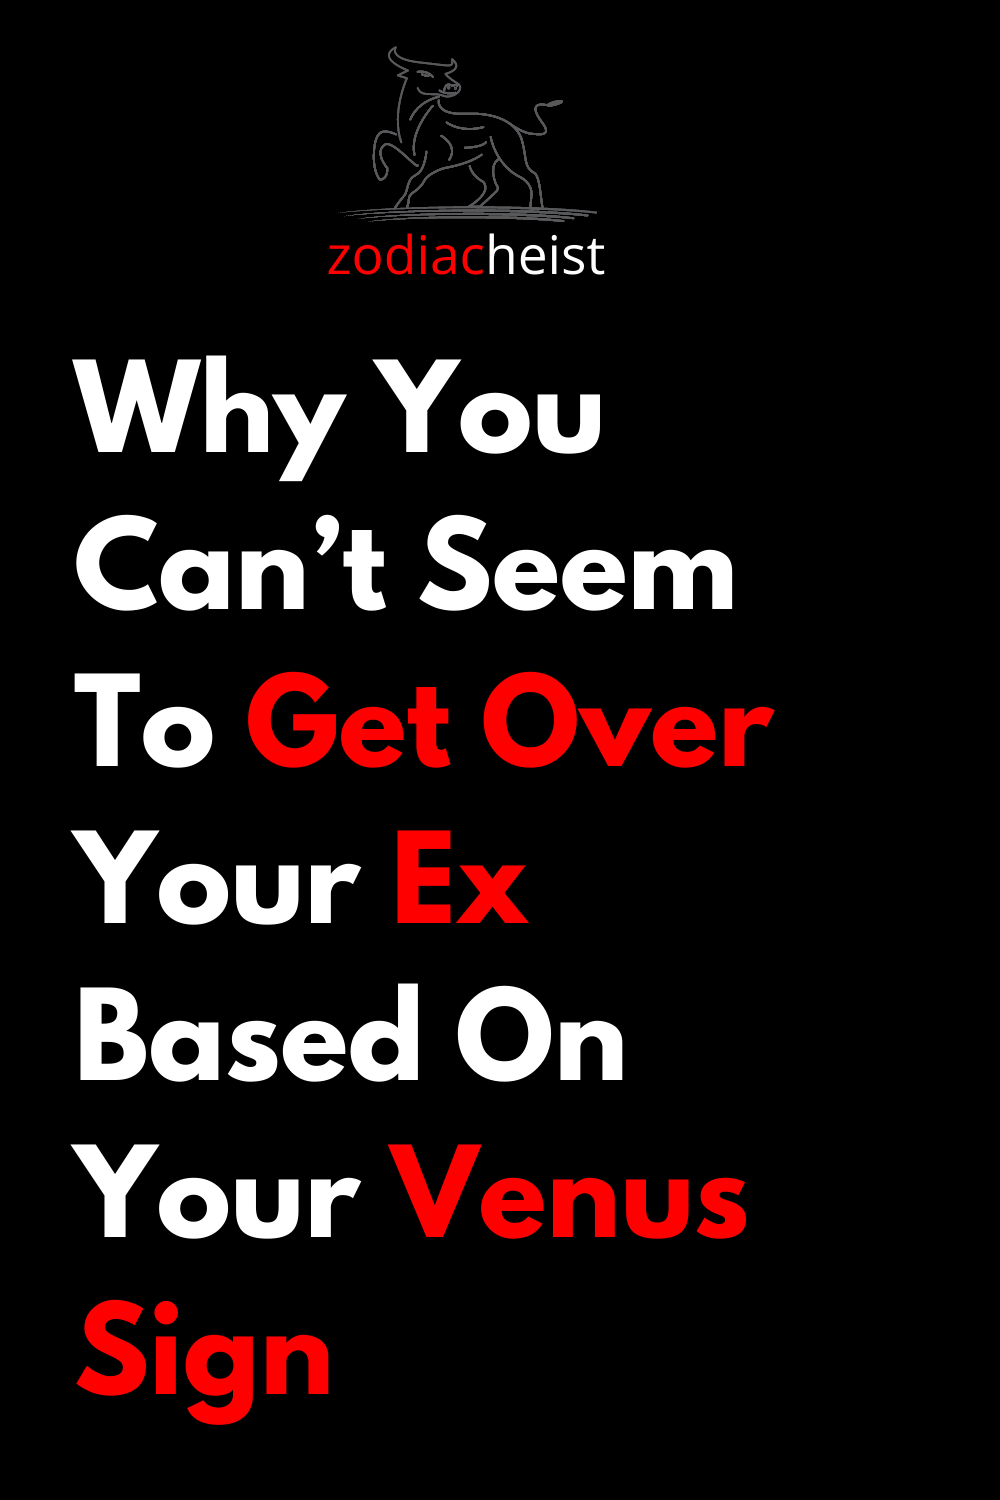 Why You Can’t Seem To Get Over Your Ex Based On Your Venus Sign